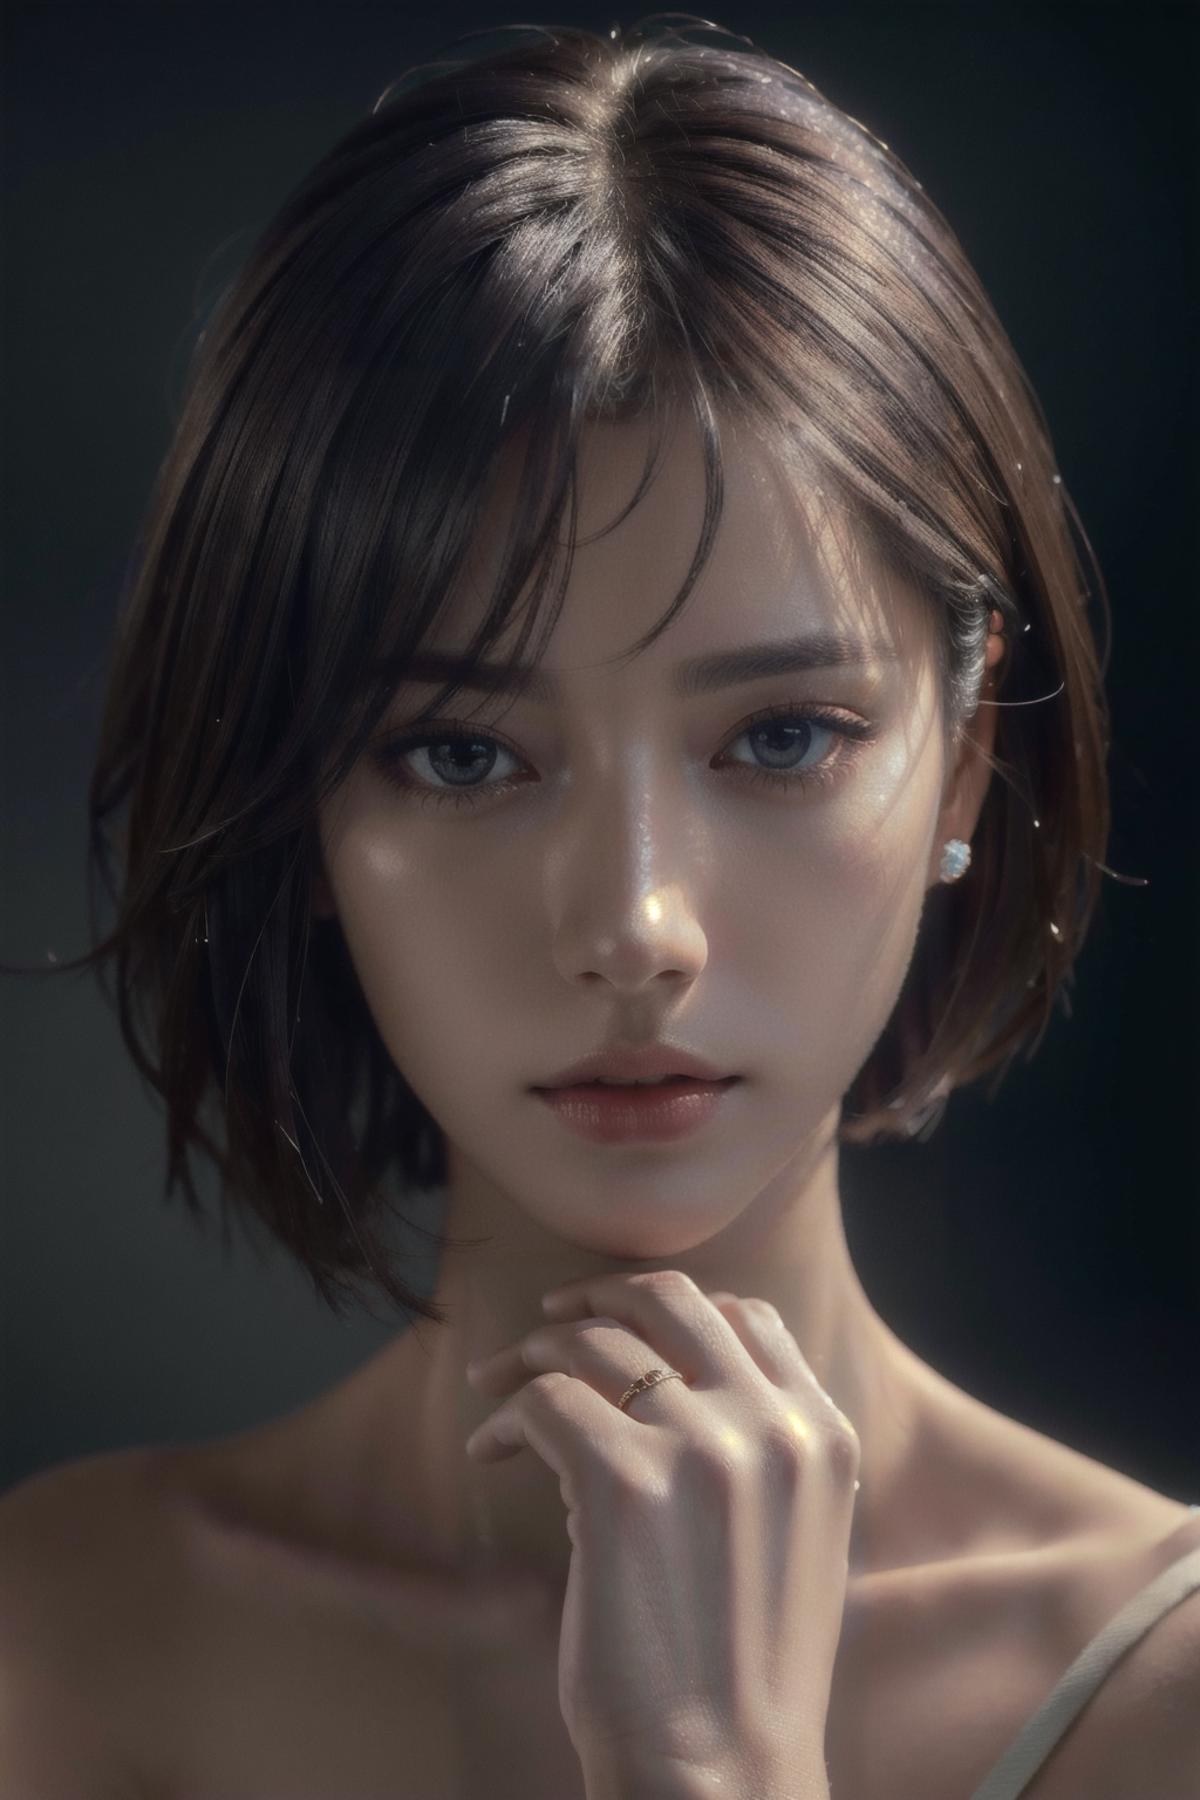 AI Infinity Realistic - 更好的手 Better hands image by Kout1227